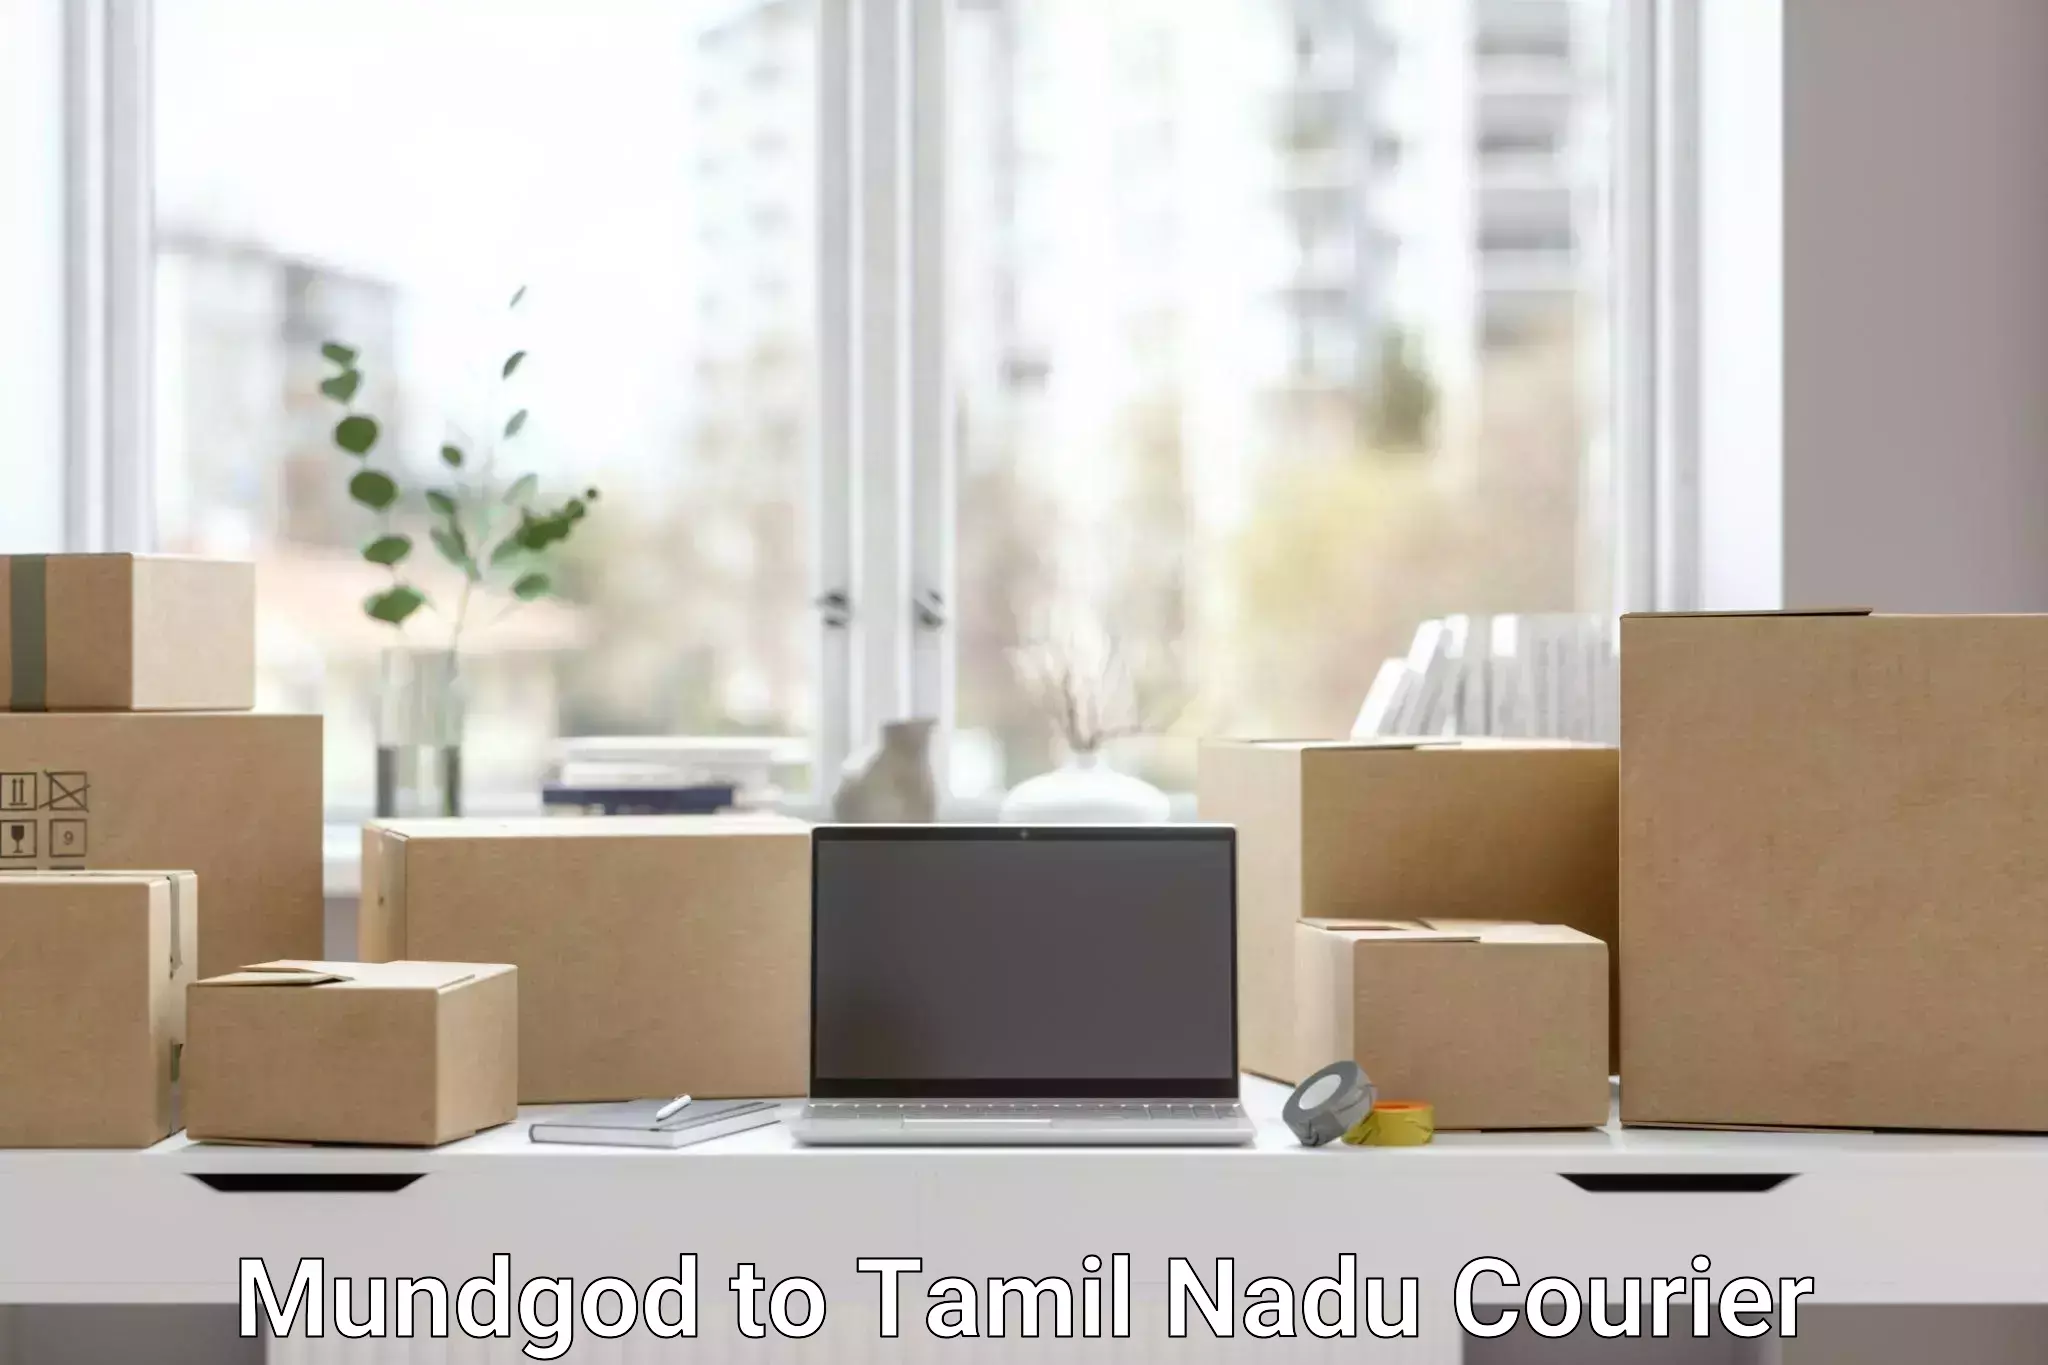 Easy access courier services in Mundgod to Virudhunagar